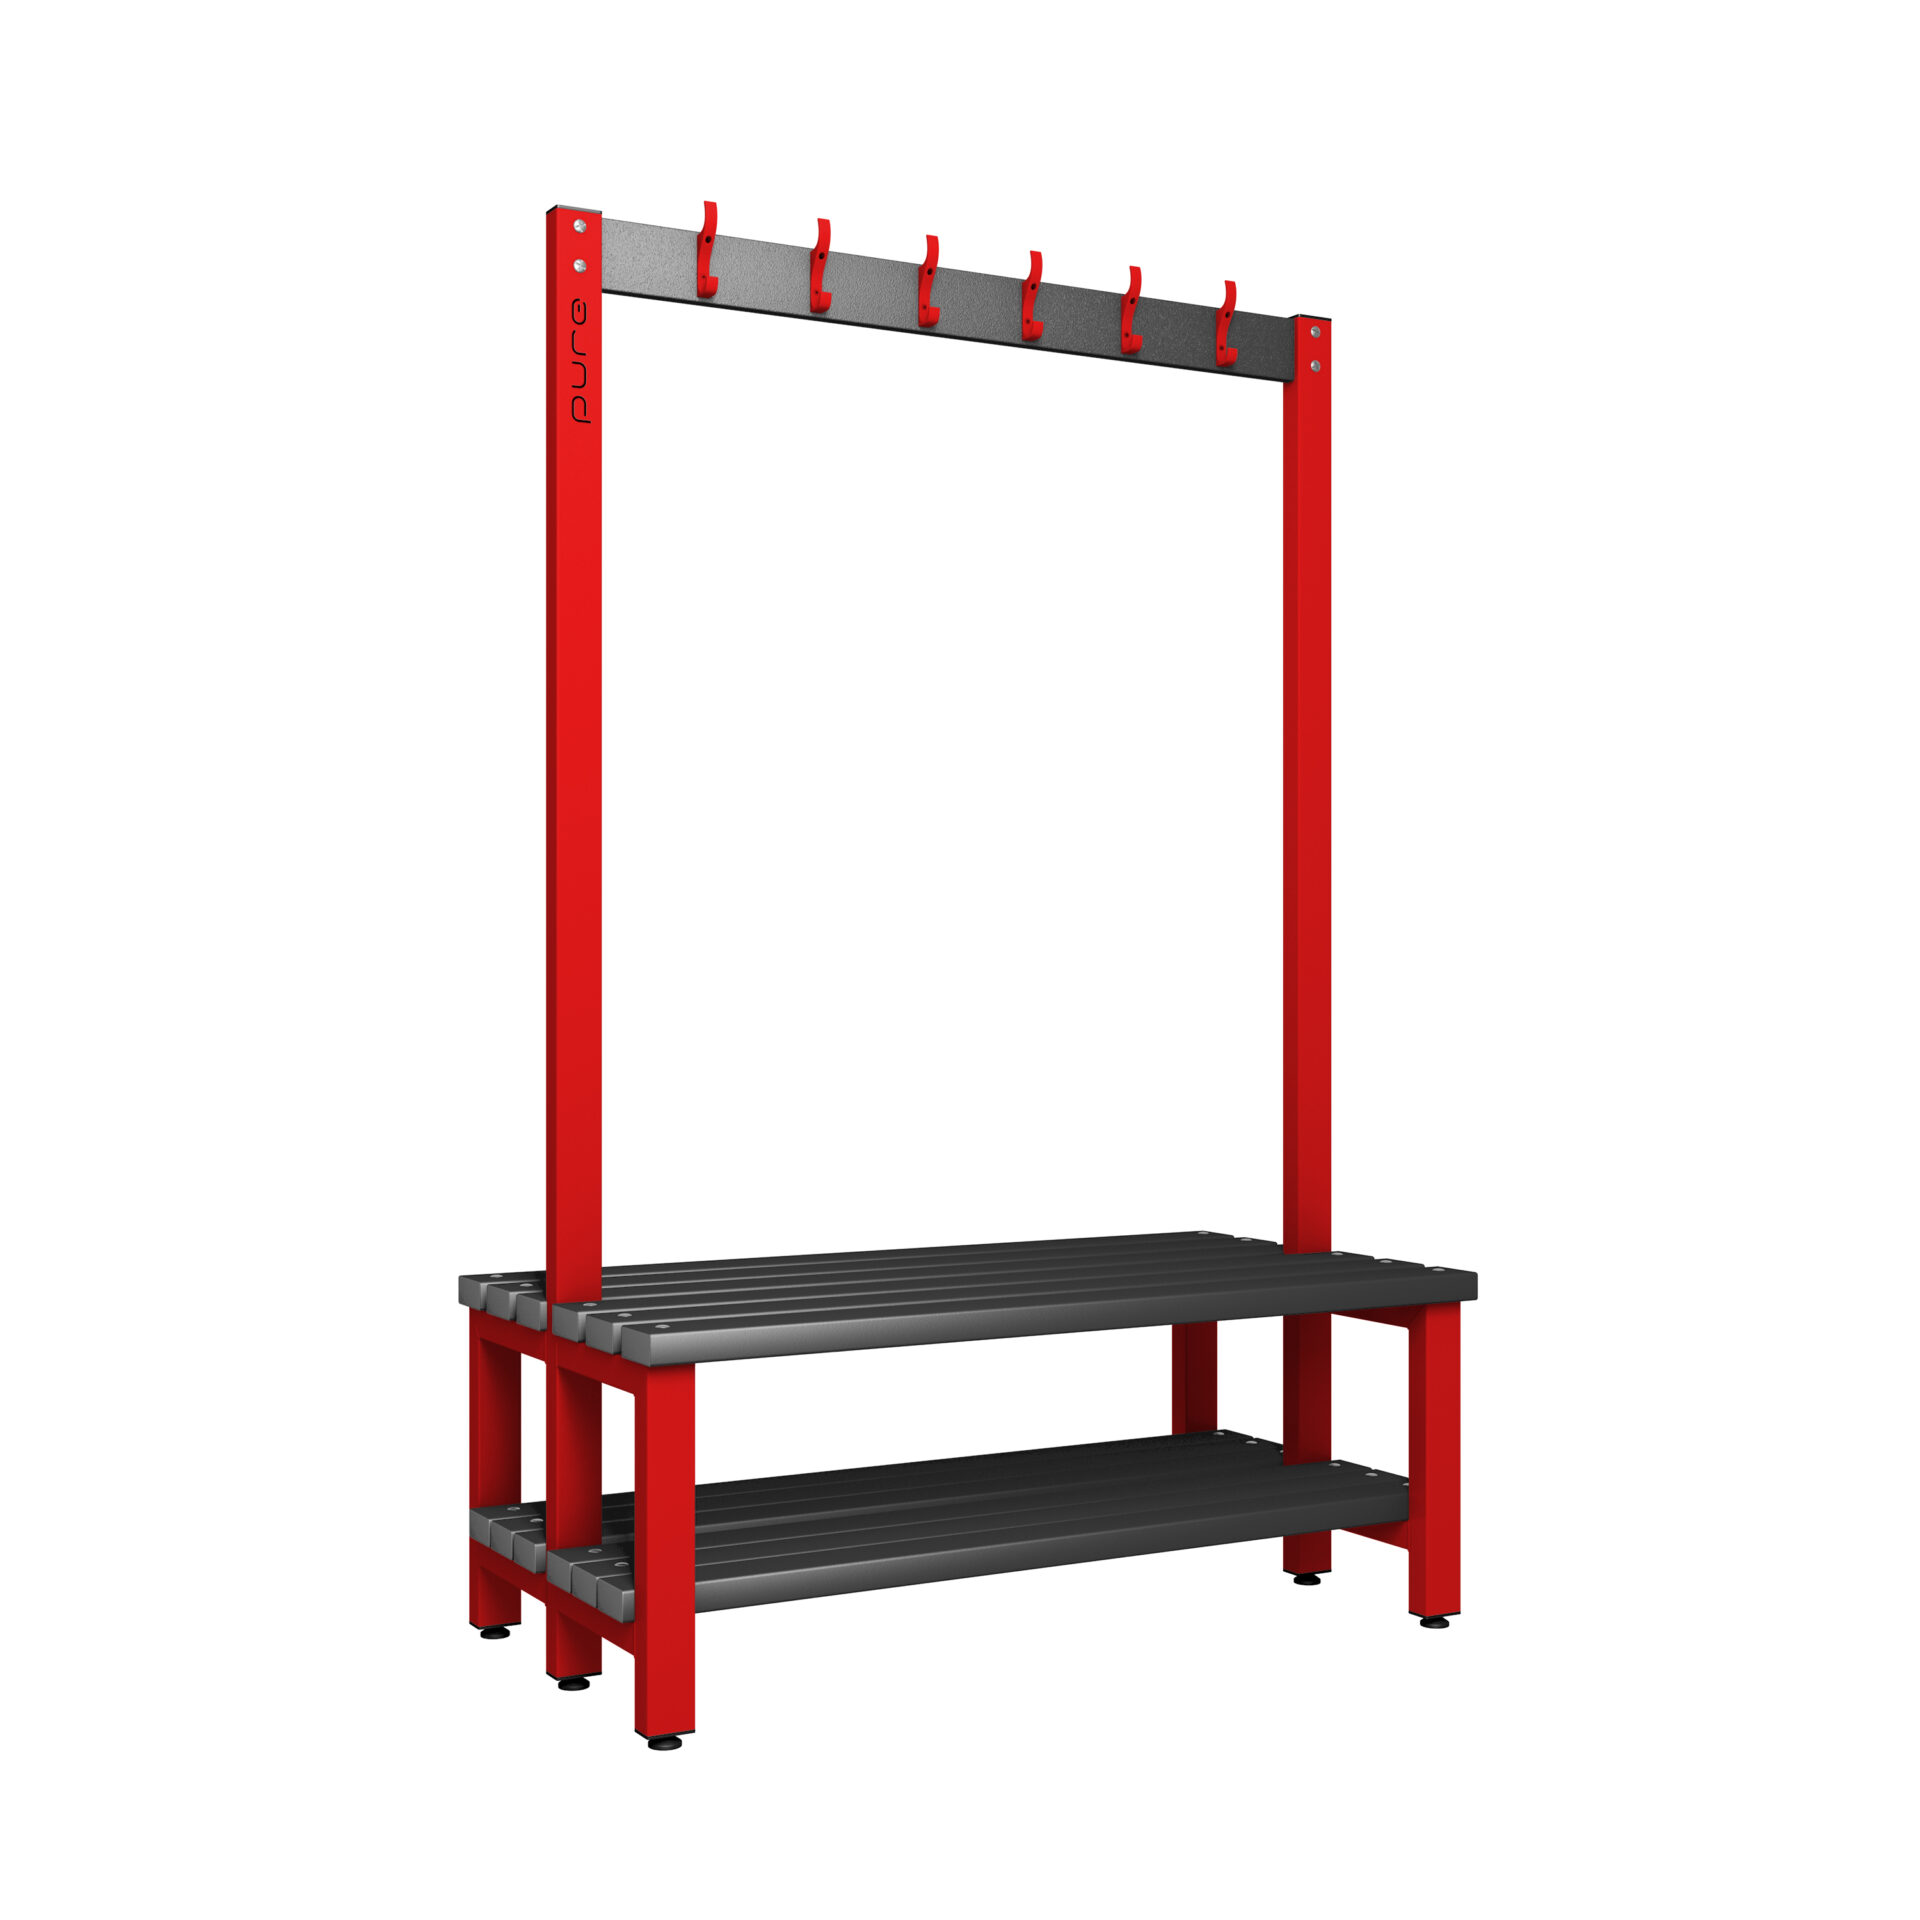 Pure Carbon Zero Double Sided 1200mm 12 Hook Bench With Shoe Shelf